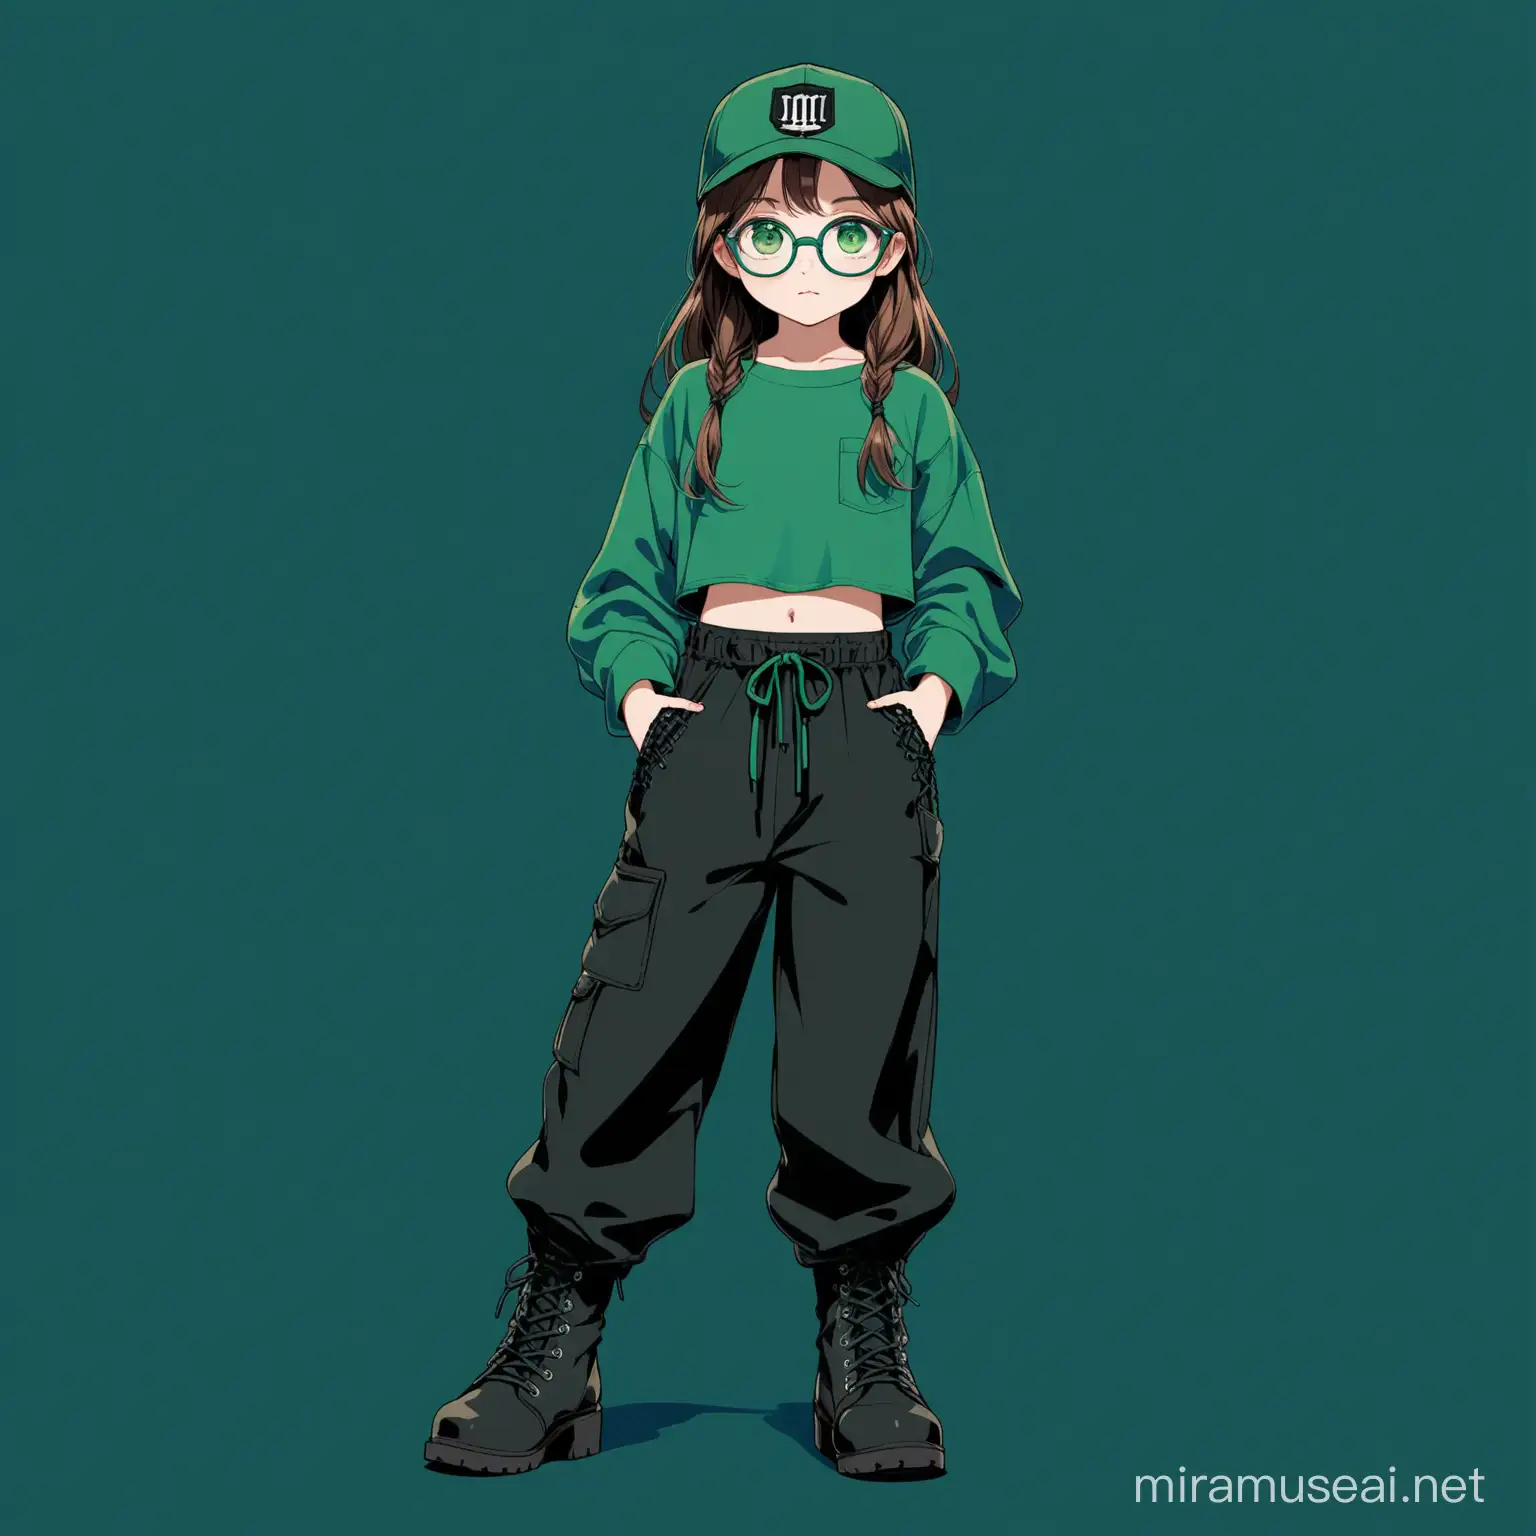 11 year old girl, long brown hair, forest green cap, long sleeves green crop top, baggy black pants with pockets green eyes, blue glasses, black laced up boots, navy blue background, 